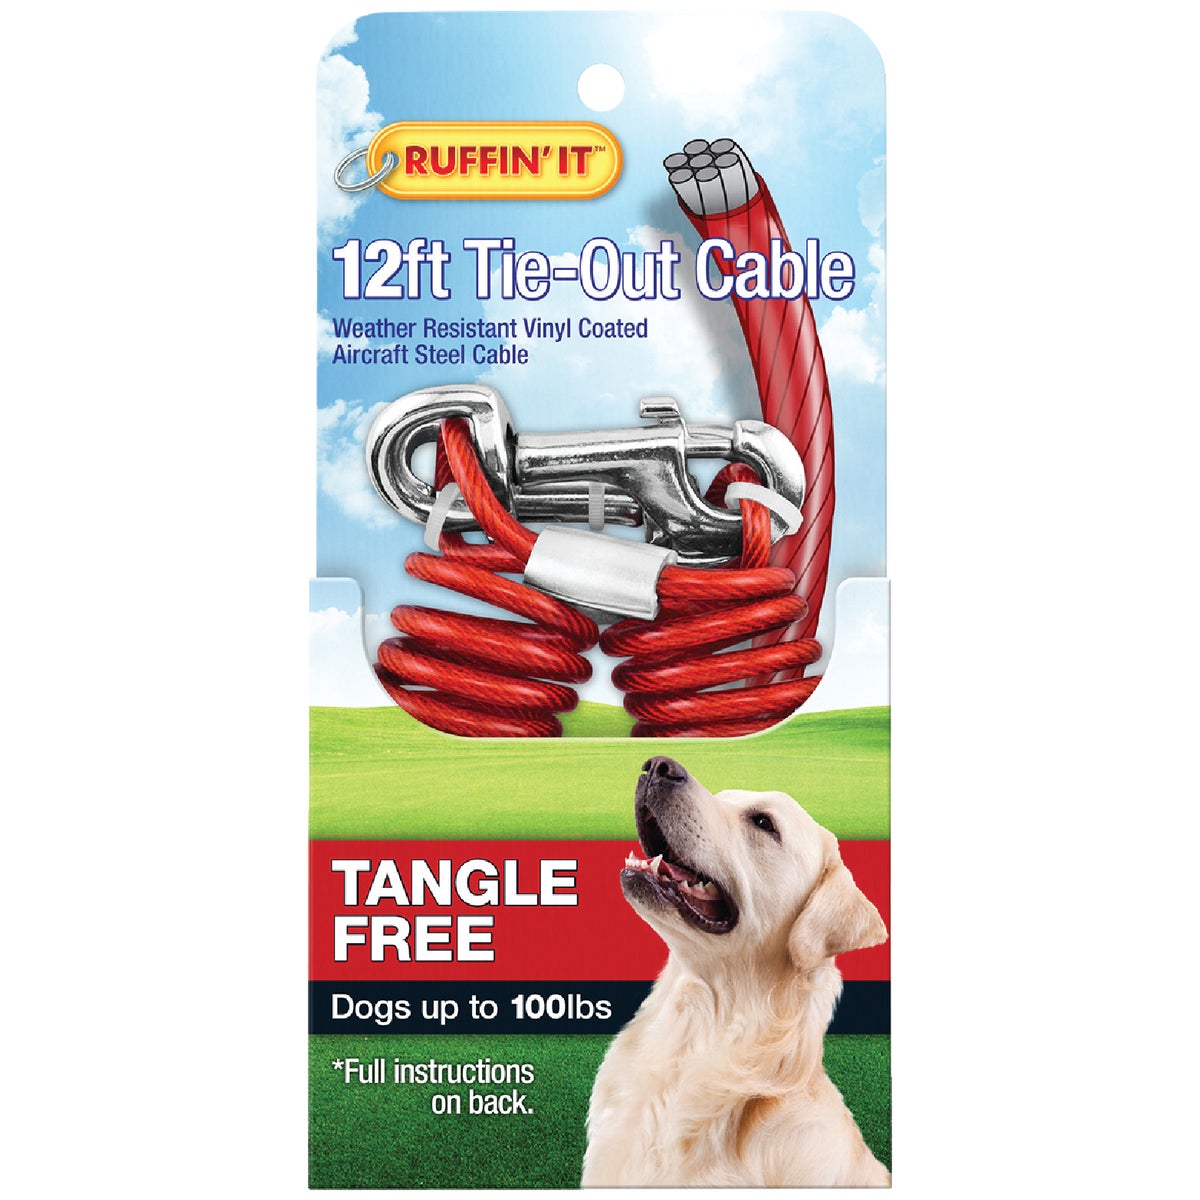 Westminster Pet Ruffin' it Tangle Free Large Dog Tie-Out Cable, 12 Ft.